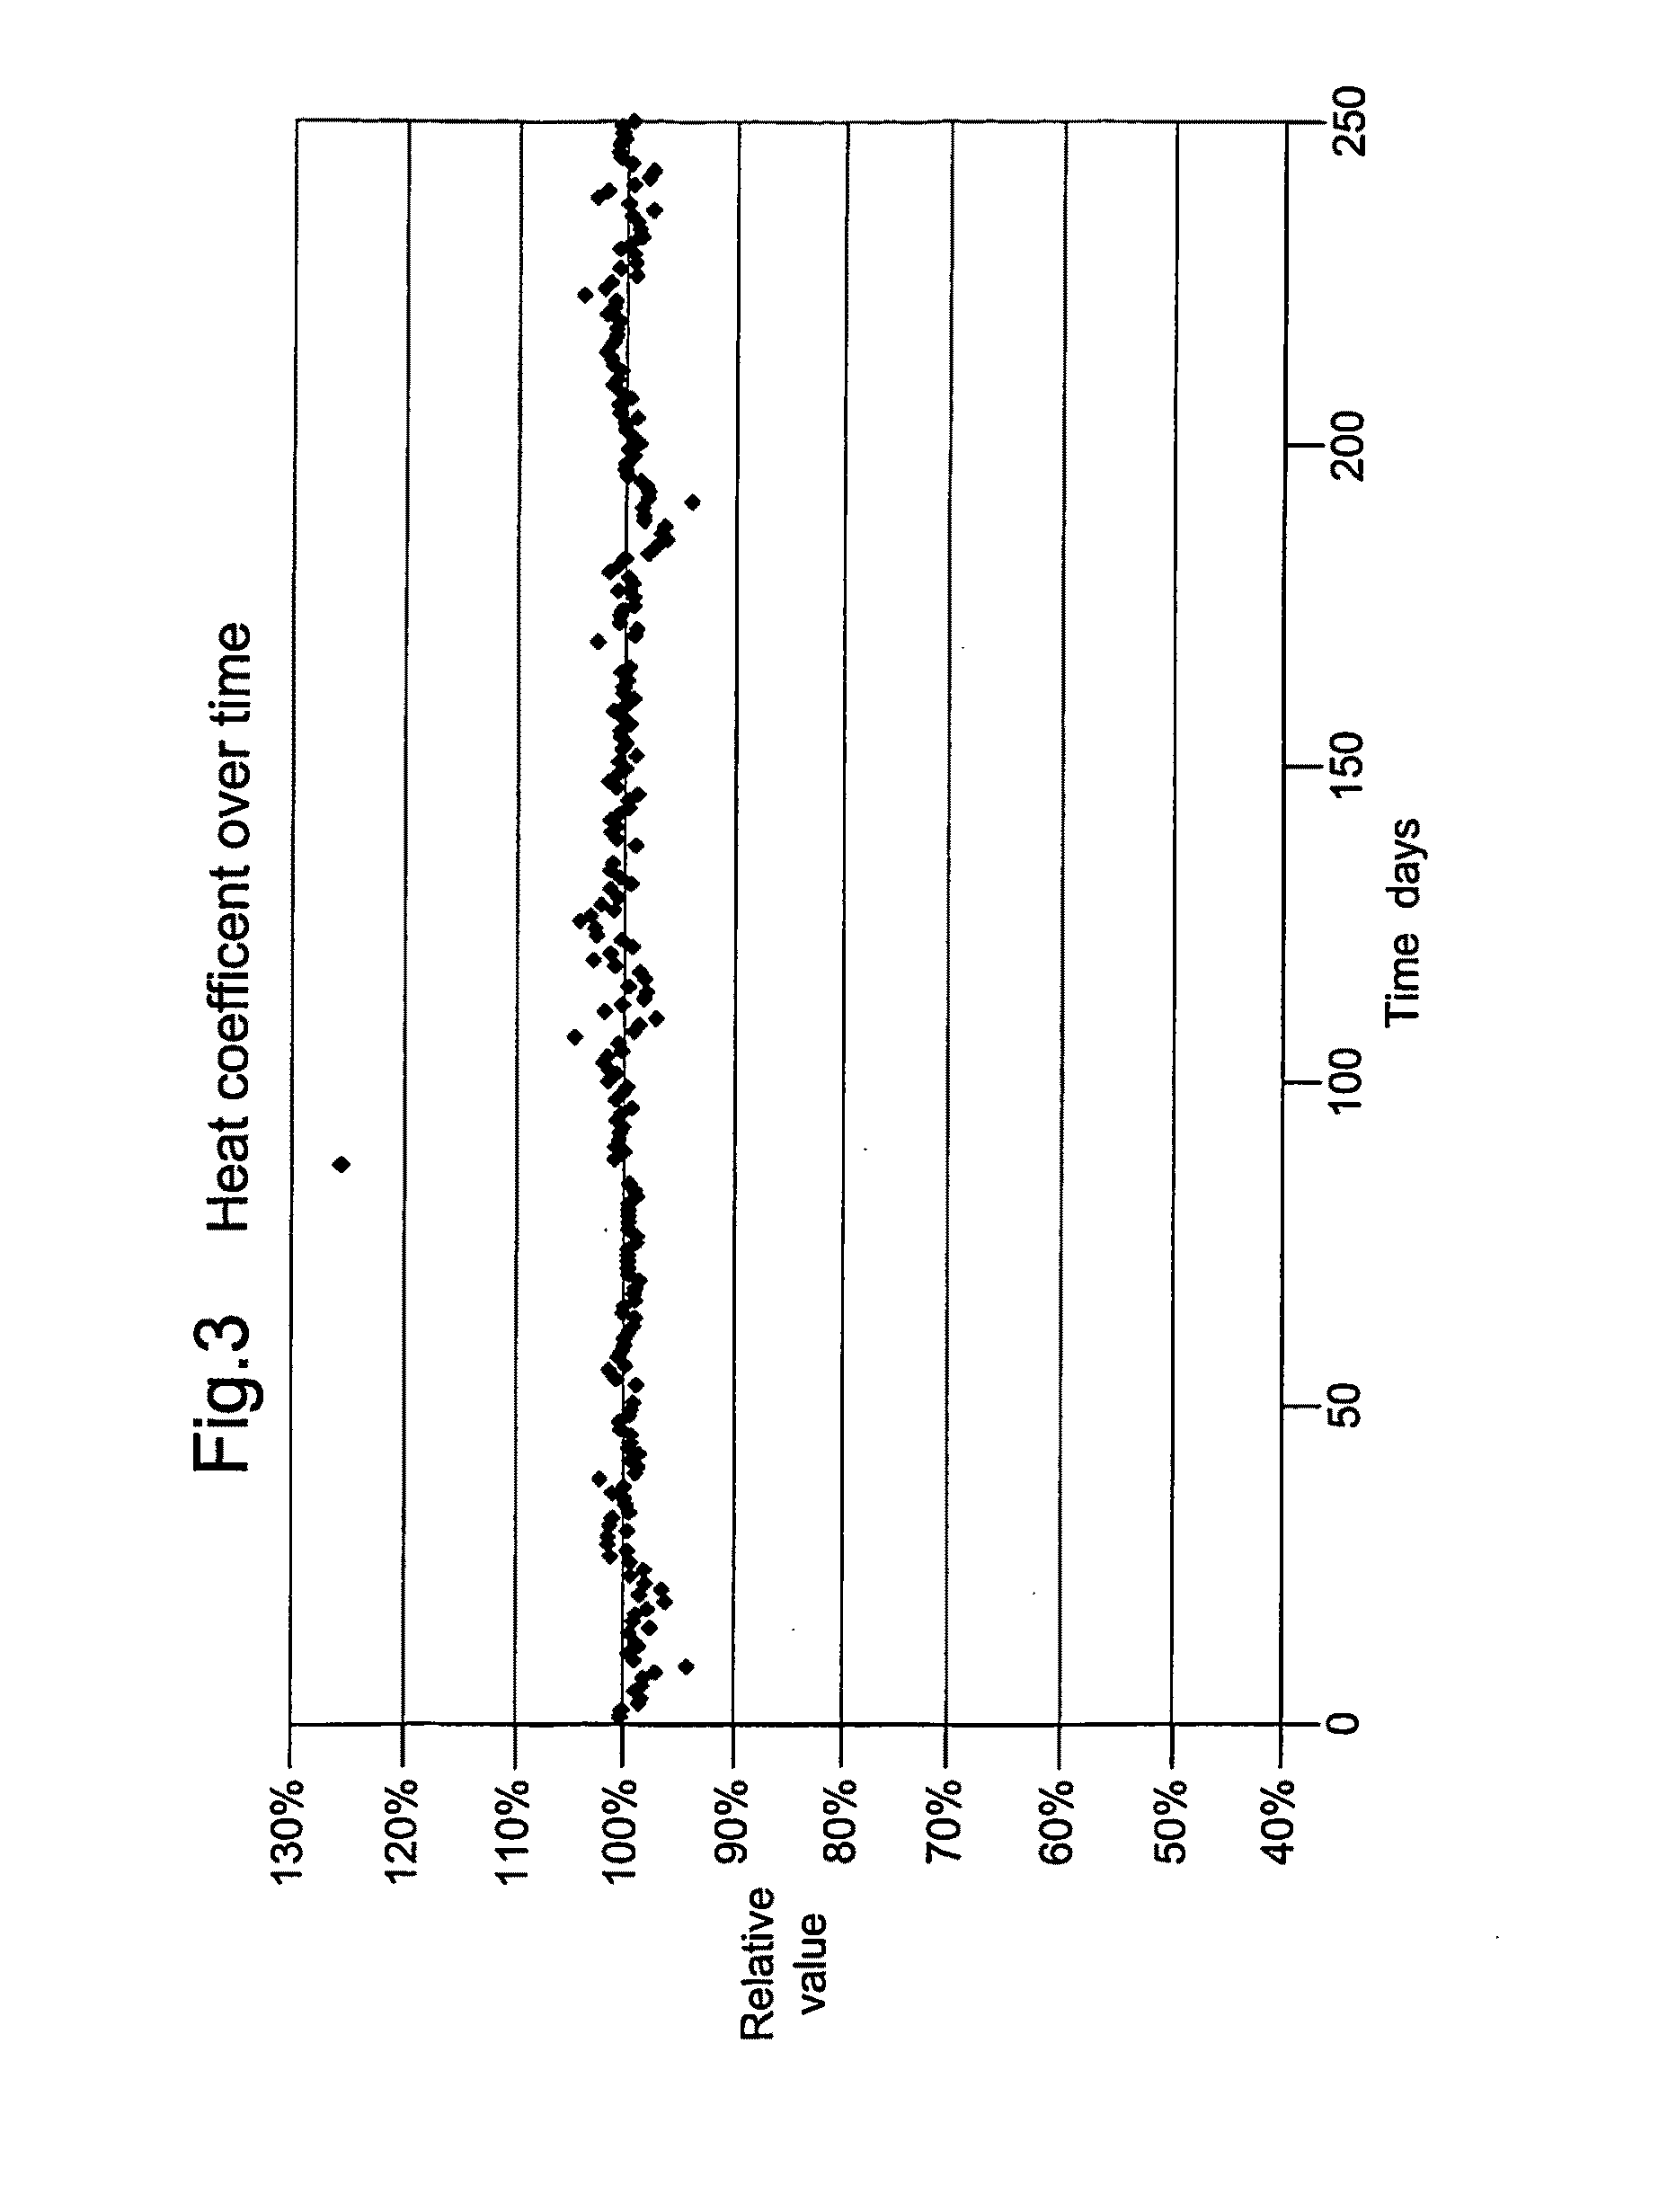 Loop type reactor for polymerization